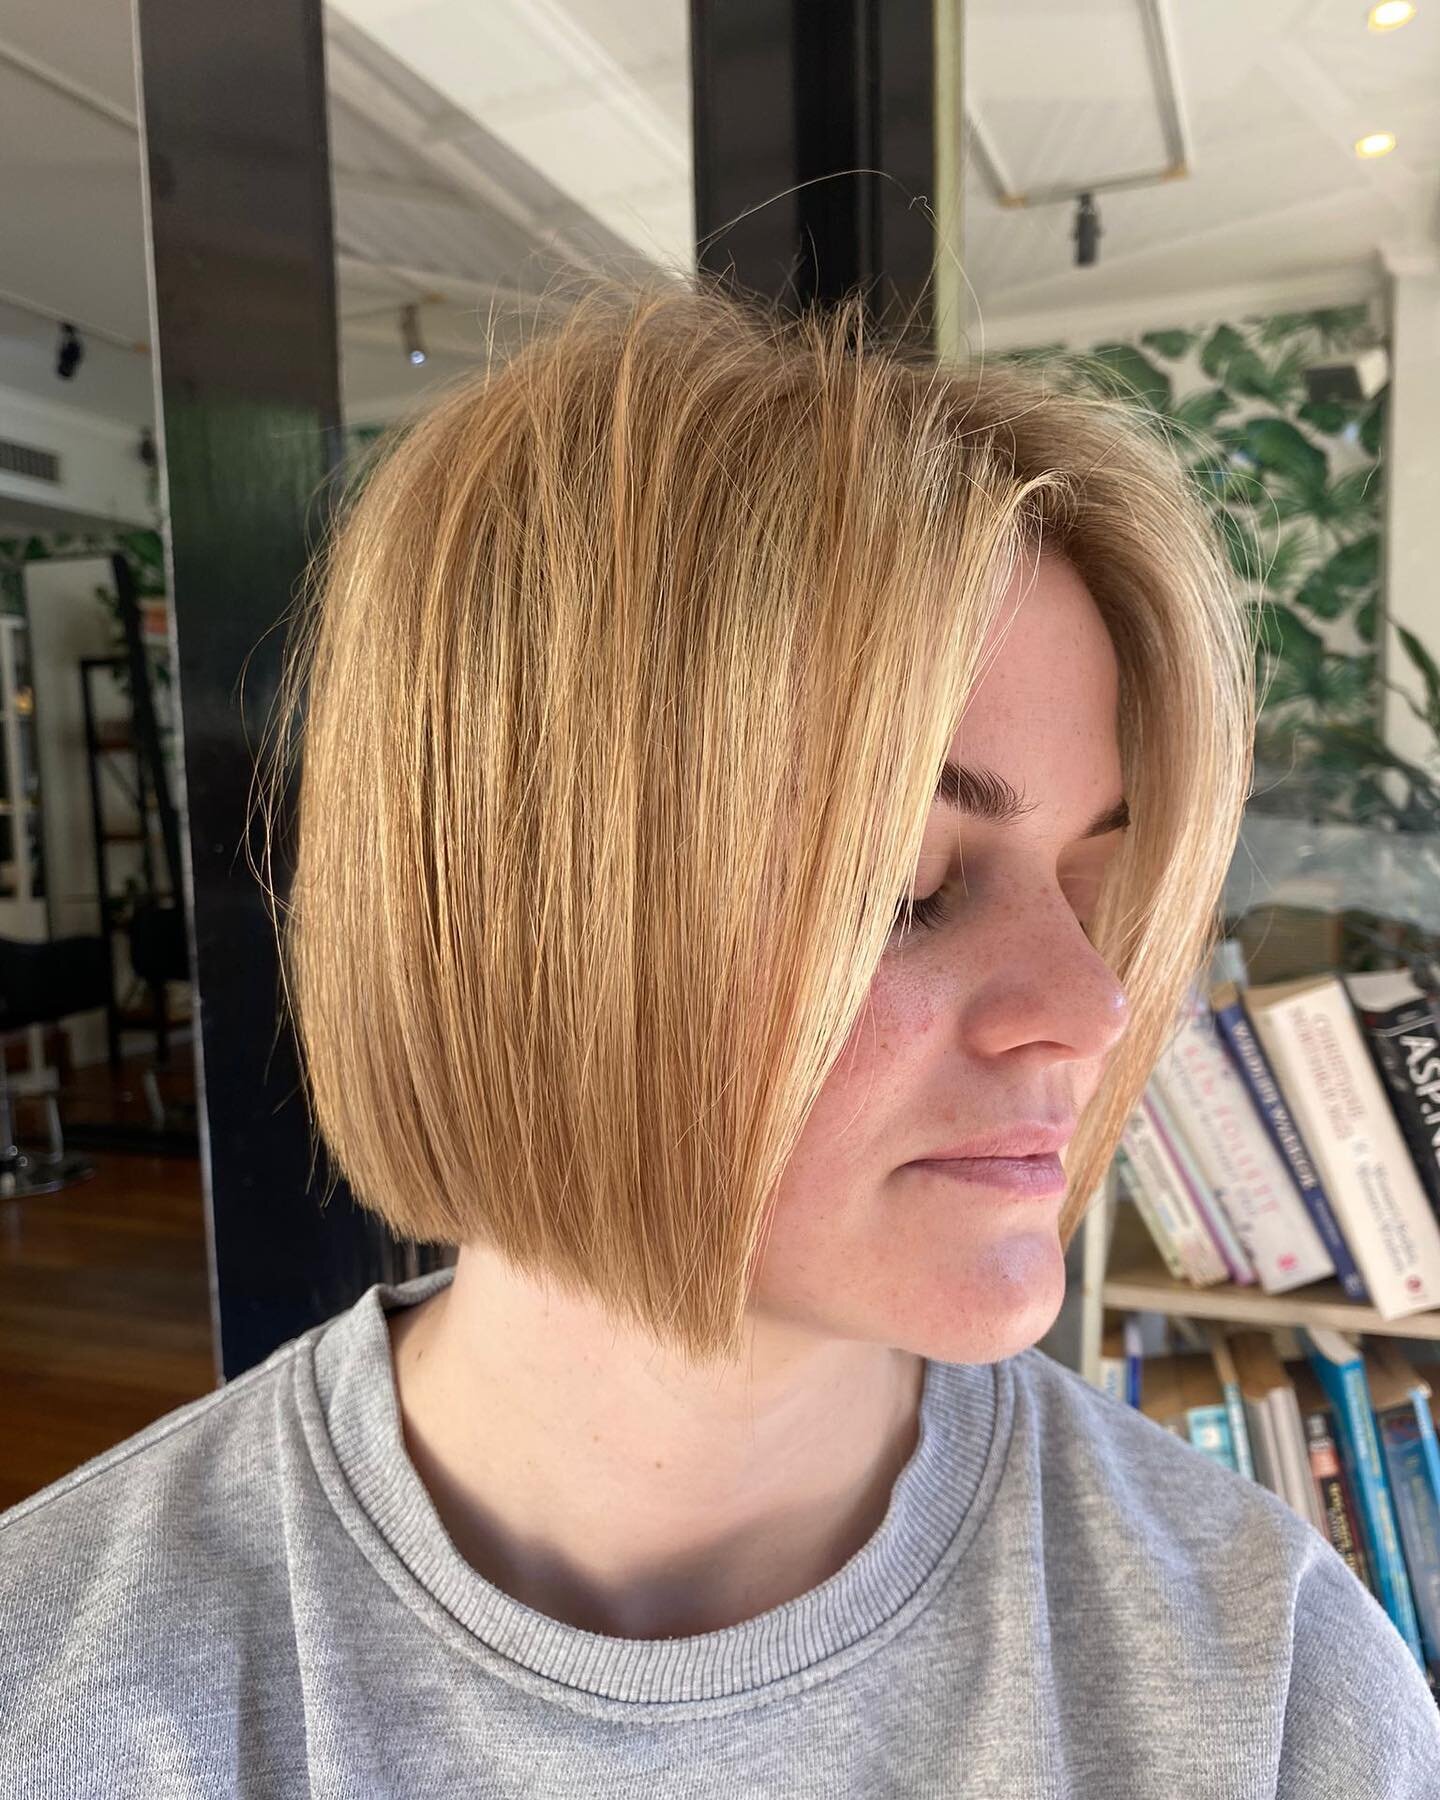 Fresh hair to warm the soul 🌞 

Haircut by @nicinskip, colour and style by @angelica00_mutti 

#sustainablesalon #sustainablehairdresser #sustainableliving #livedinblonde #balayage #blonde #blondehighlights #newhair #sydneyhairdresser #sydneystylist